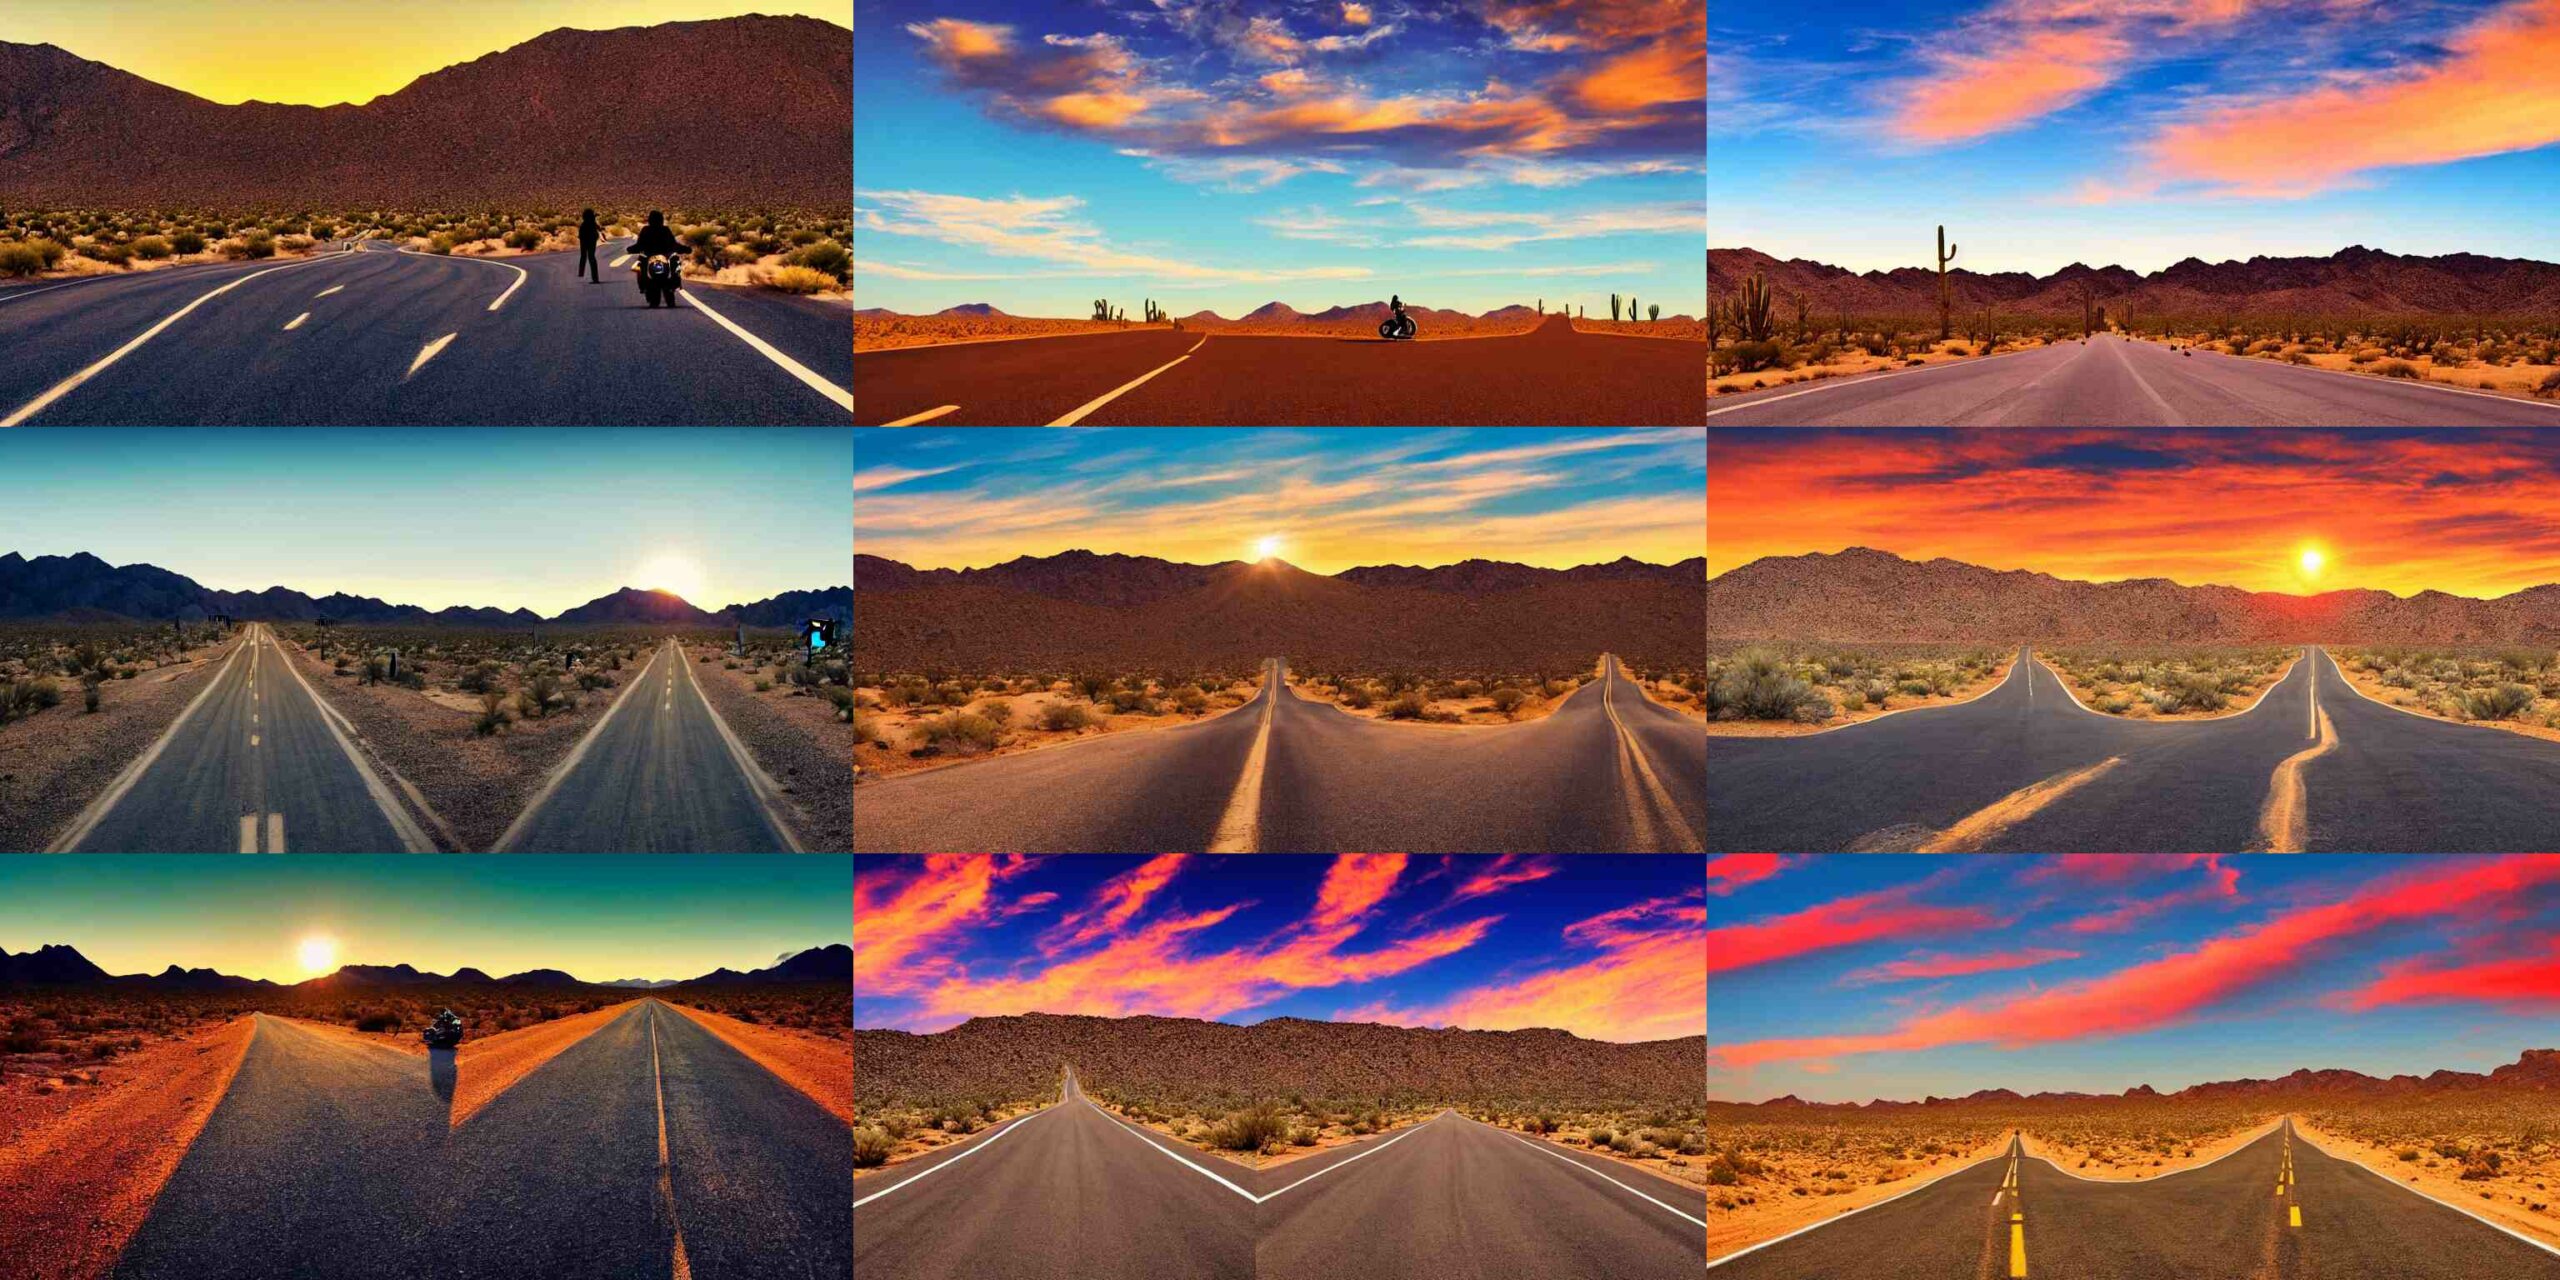 Use This API To Modify Your Images And Insert Effects